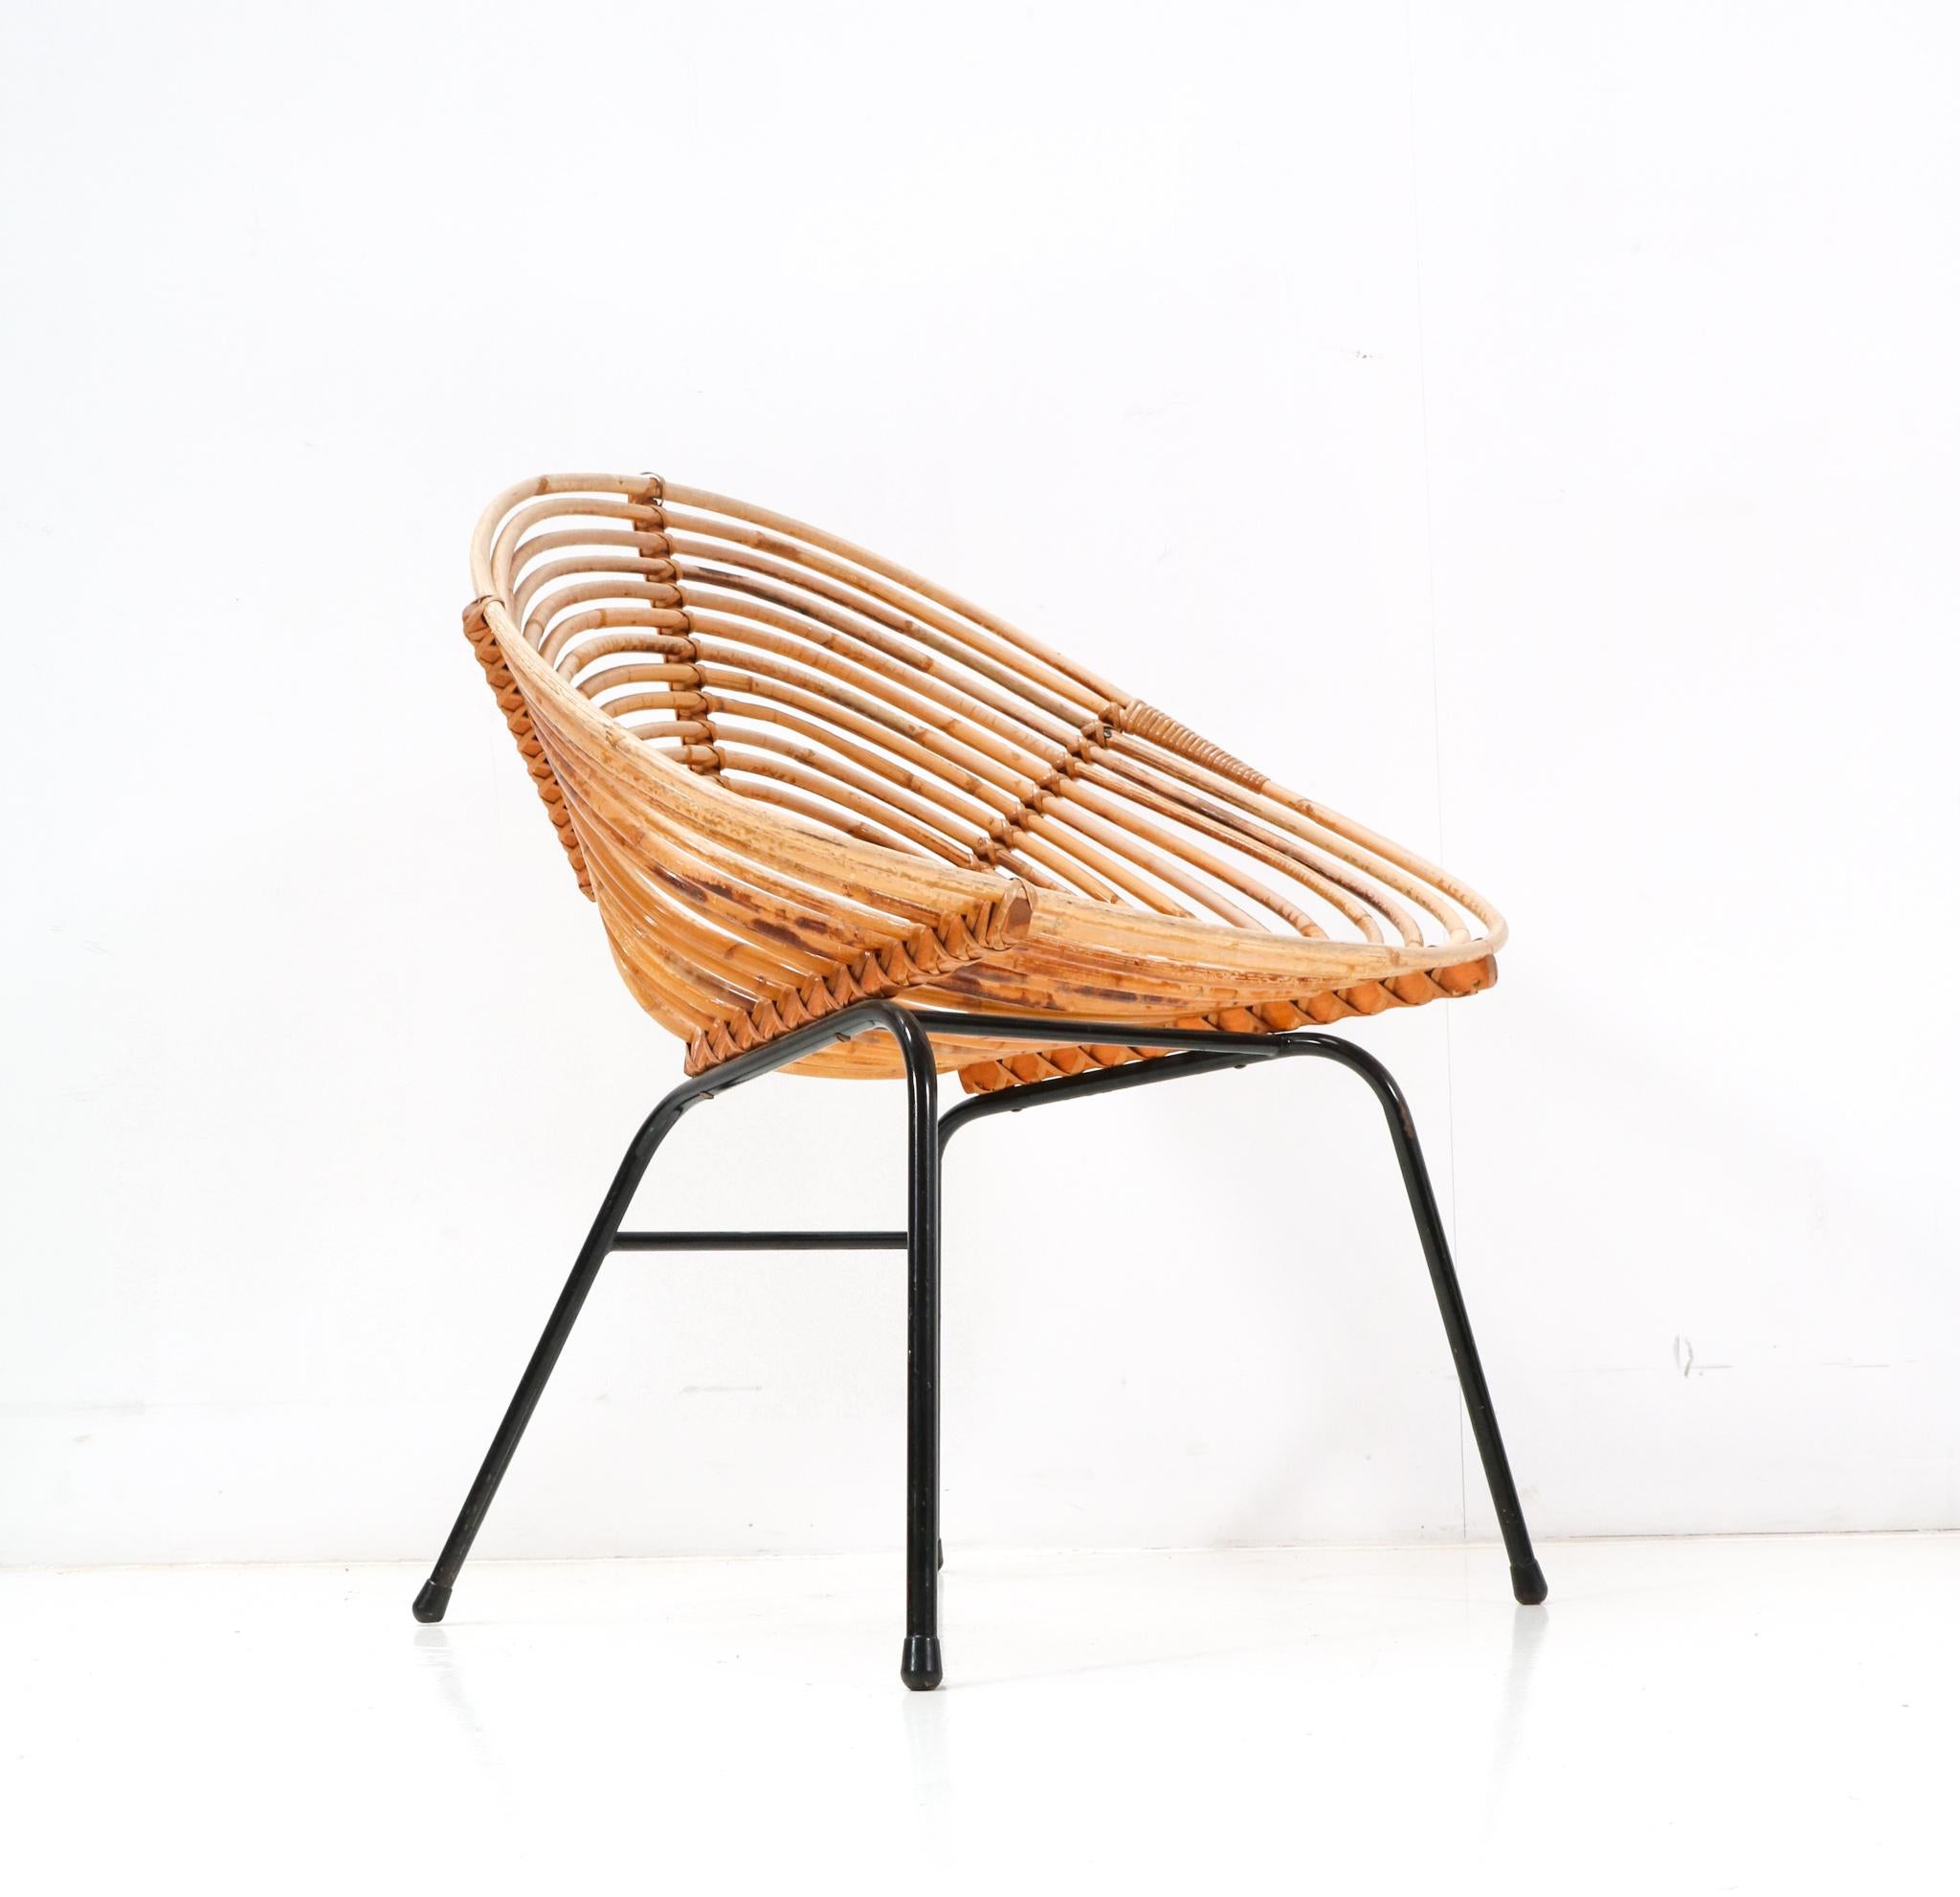 Dutch Rattan Mid-Century Modern Lounge Chair by Dirk van Sliedregt for Rohe, 1950s For Sale